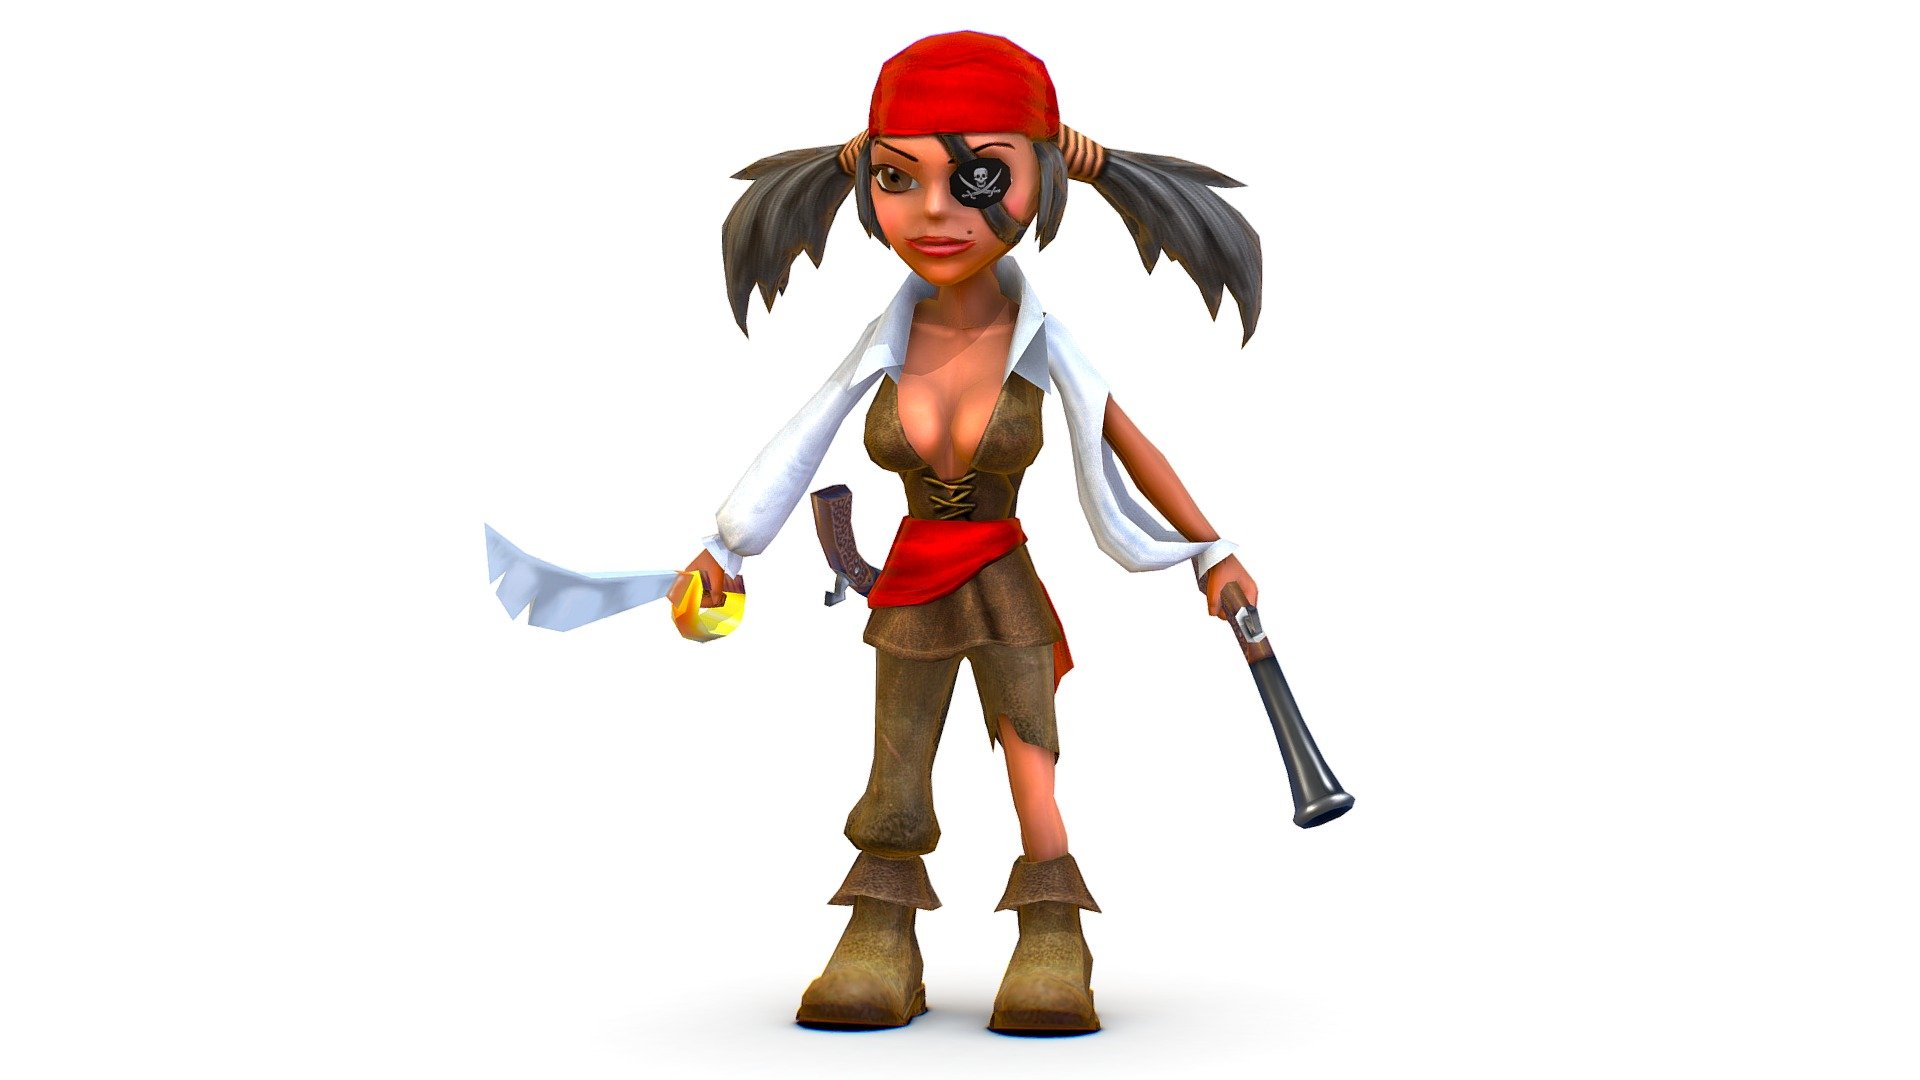 Skined Rigged Low Poly 3d model  - Girl Bandit Pirate Gangster - Maya file included - Skined Girl Bandit Pirate Gangster Low Poly - Buy Royalty Free 3D model by Oleg Shuldiakov (@olegshuldiakov) 3d model